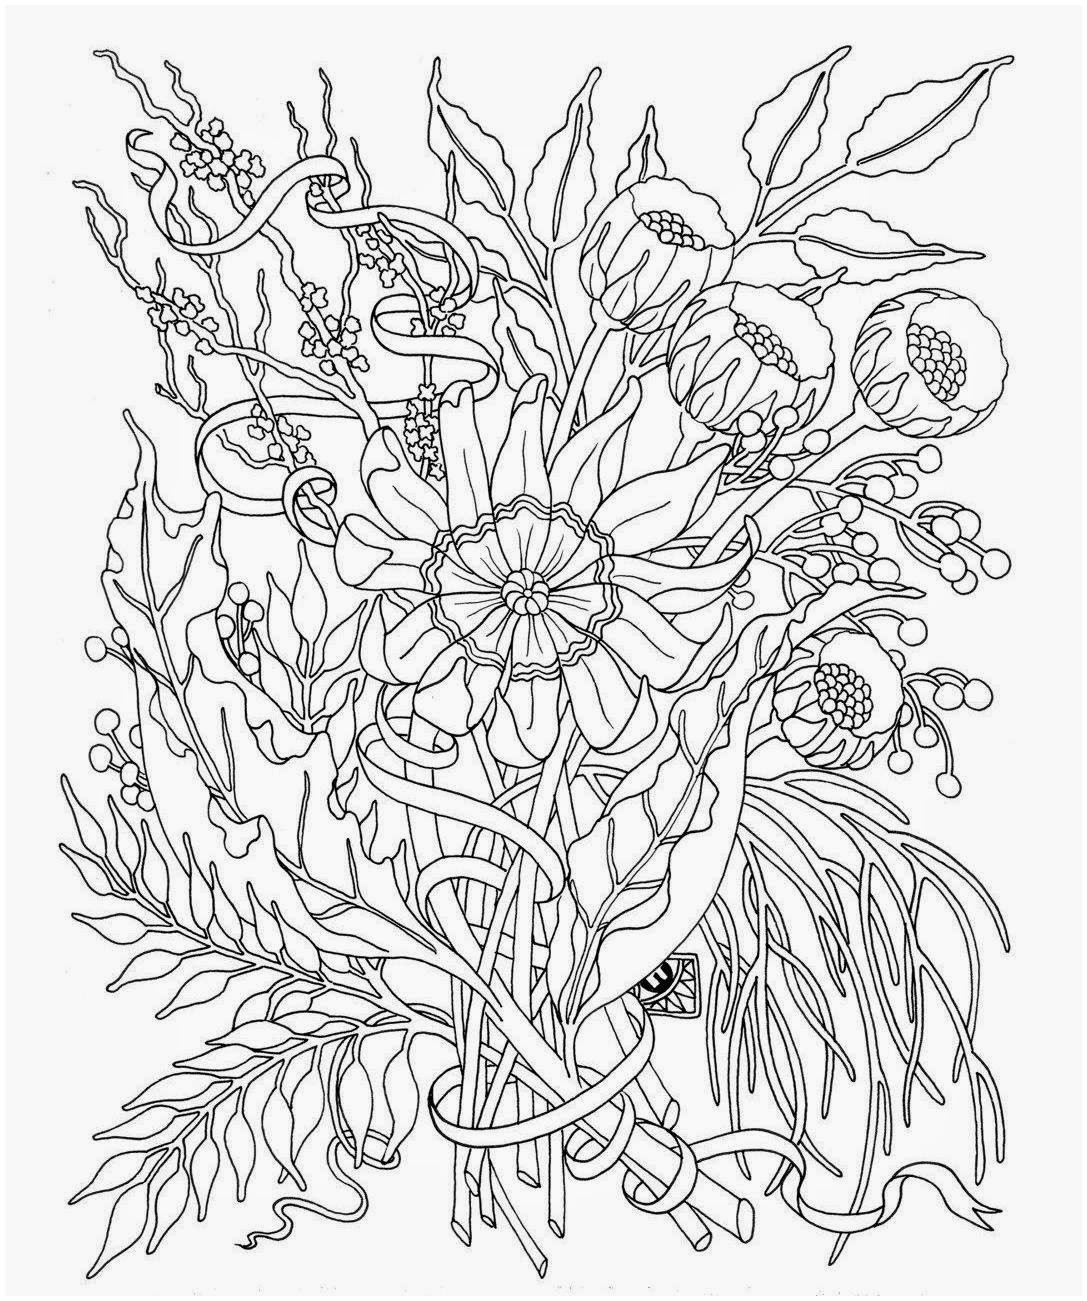 14 Fashionable Mickey Mouse Vase 2024 free download mickey mouse vase of coloring pages disney bestcoloringpages me pertaining to coloring pages disney best of vases flower vase coloring page pages flowers in a top i